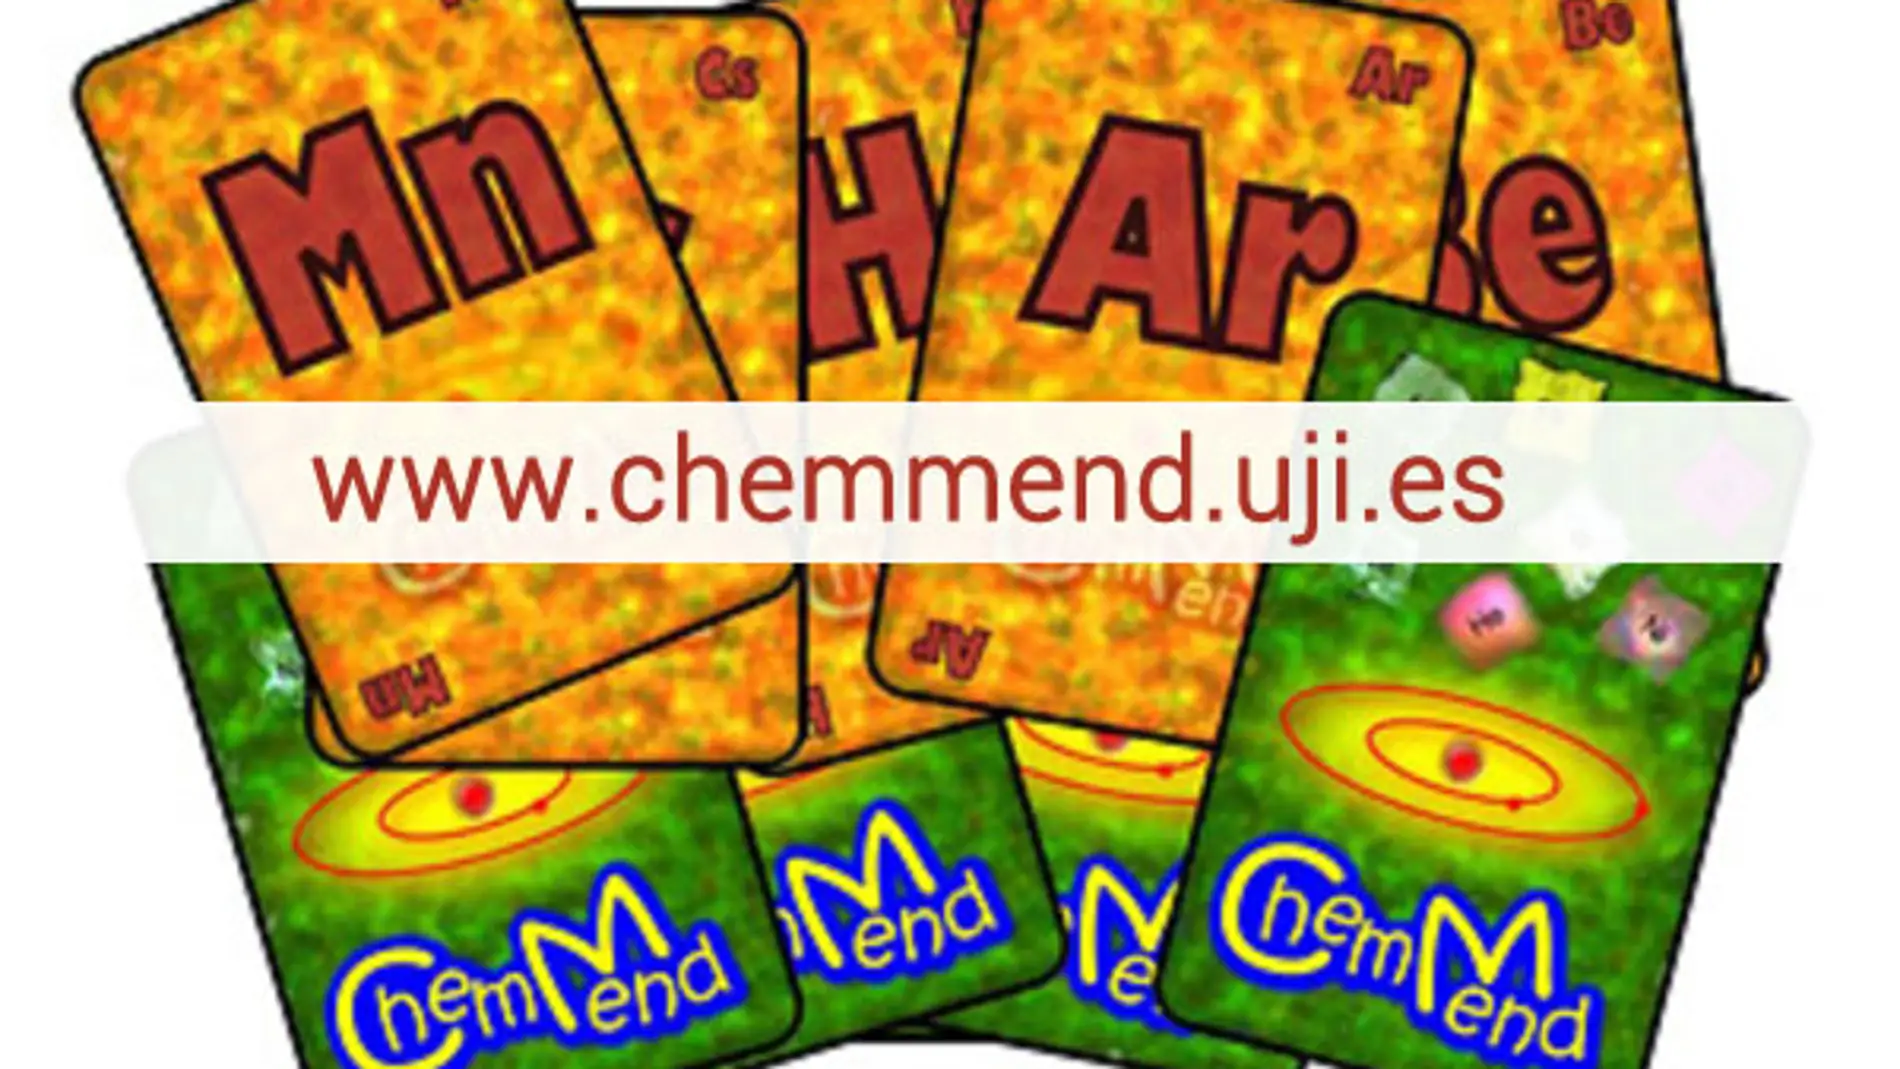 ChemMend